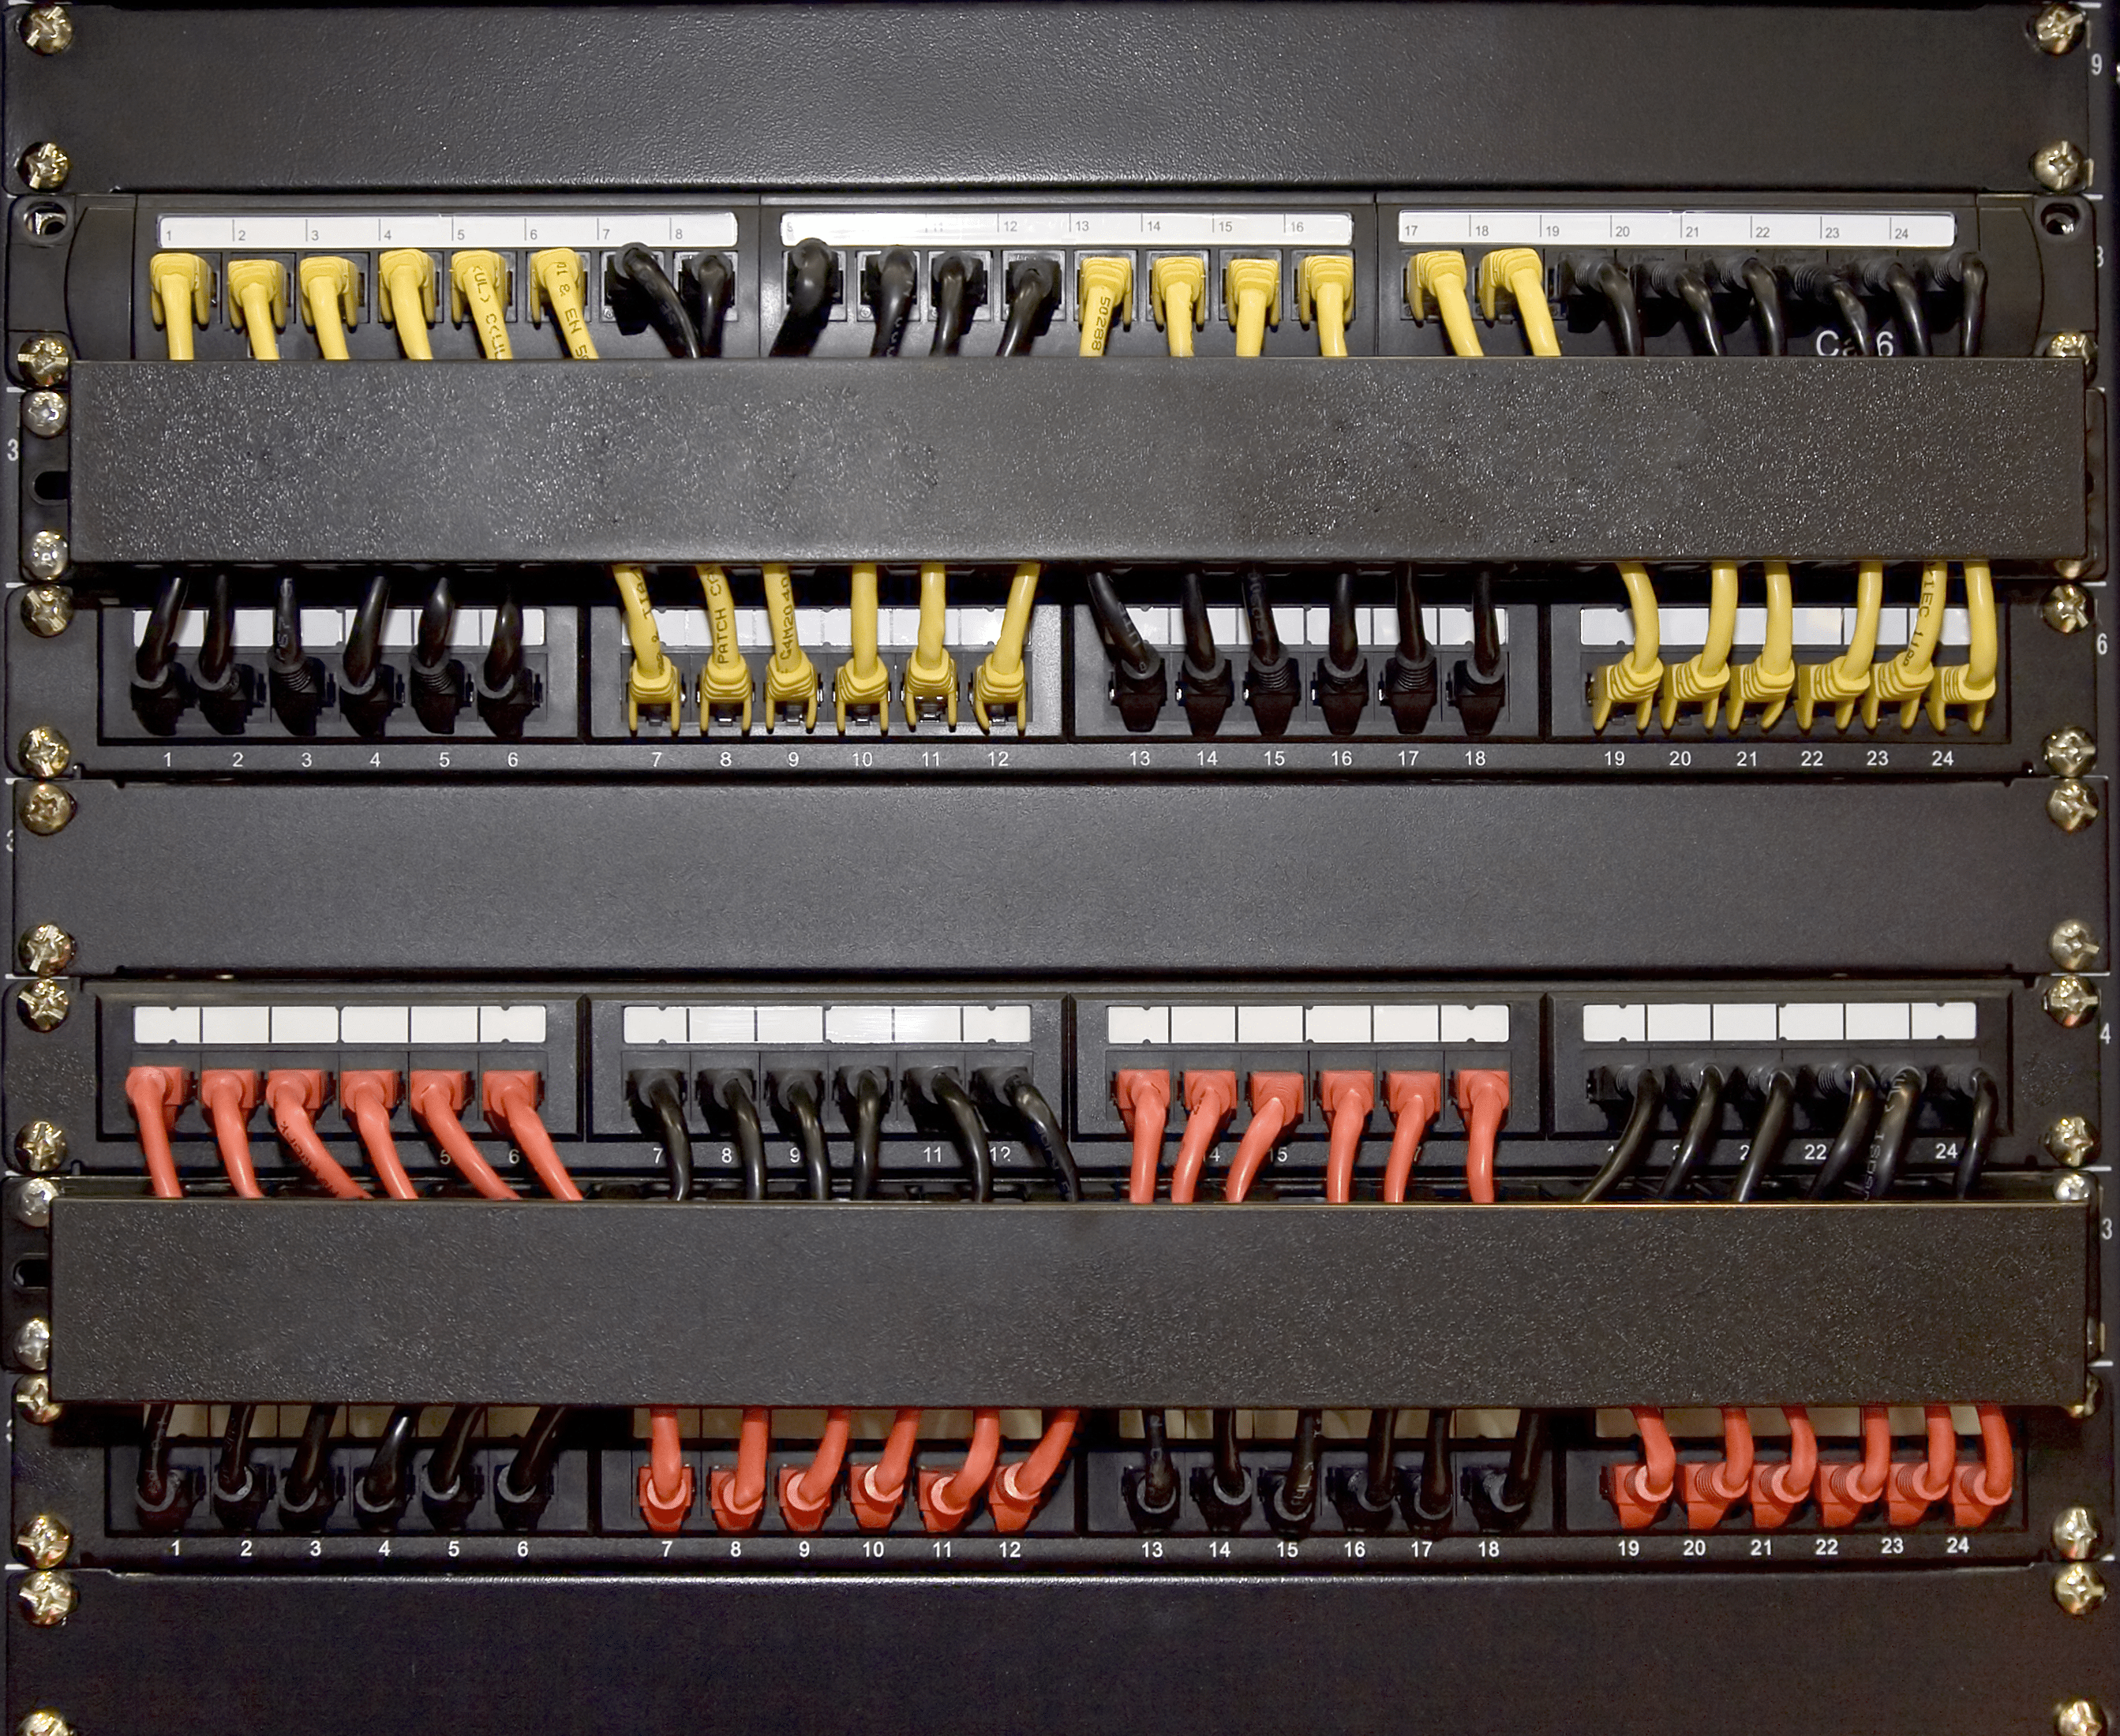 Why You Need Rack Mount Patch Panels